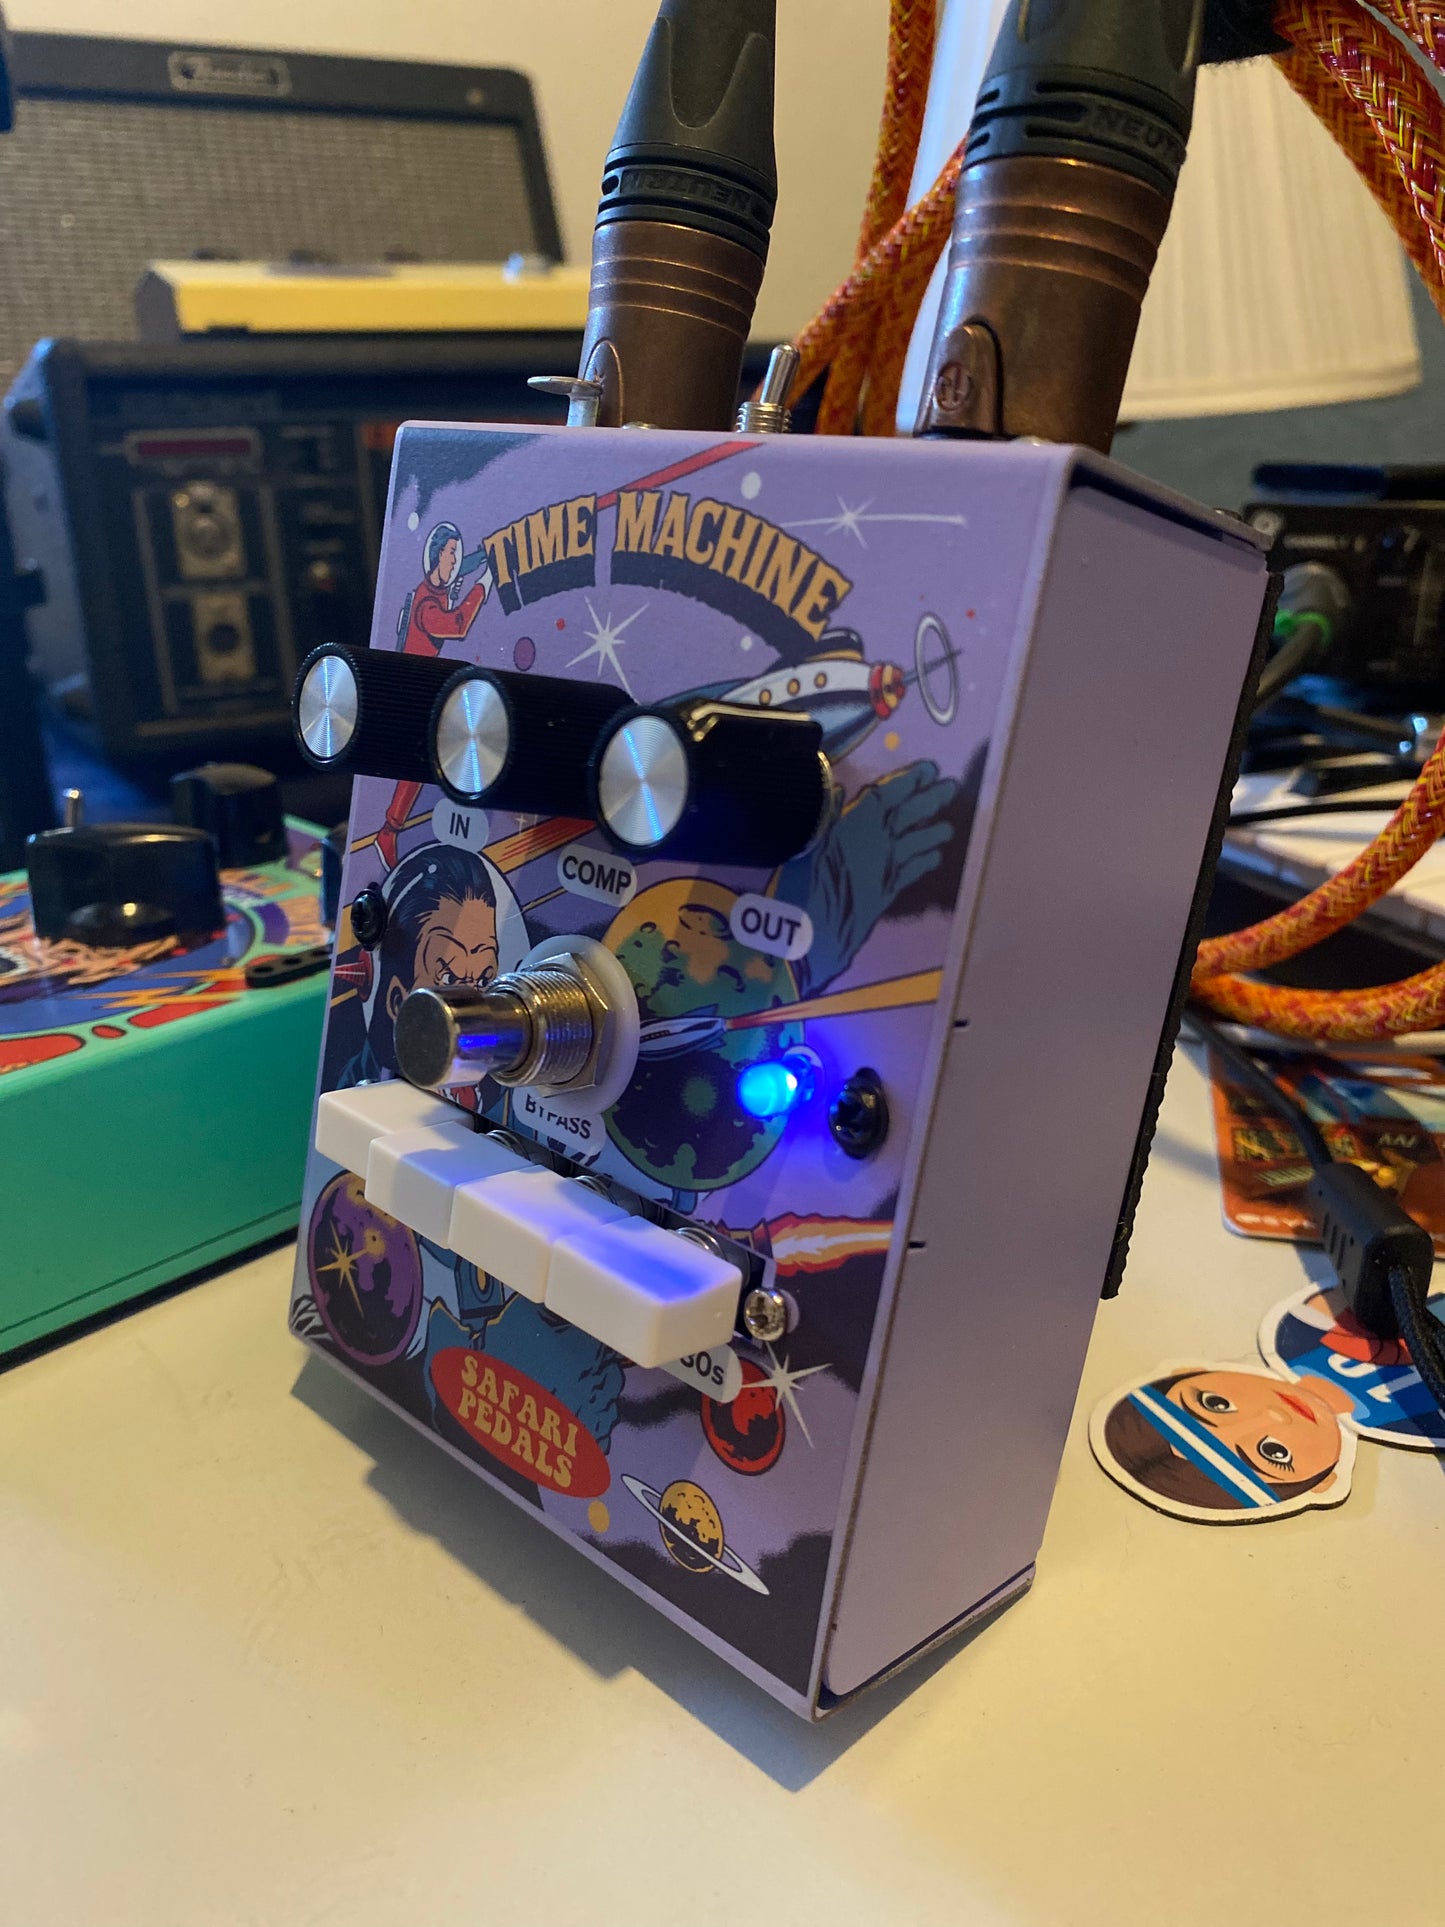 Time Machine hardware - Mic preamp and overdrive pedal with compression